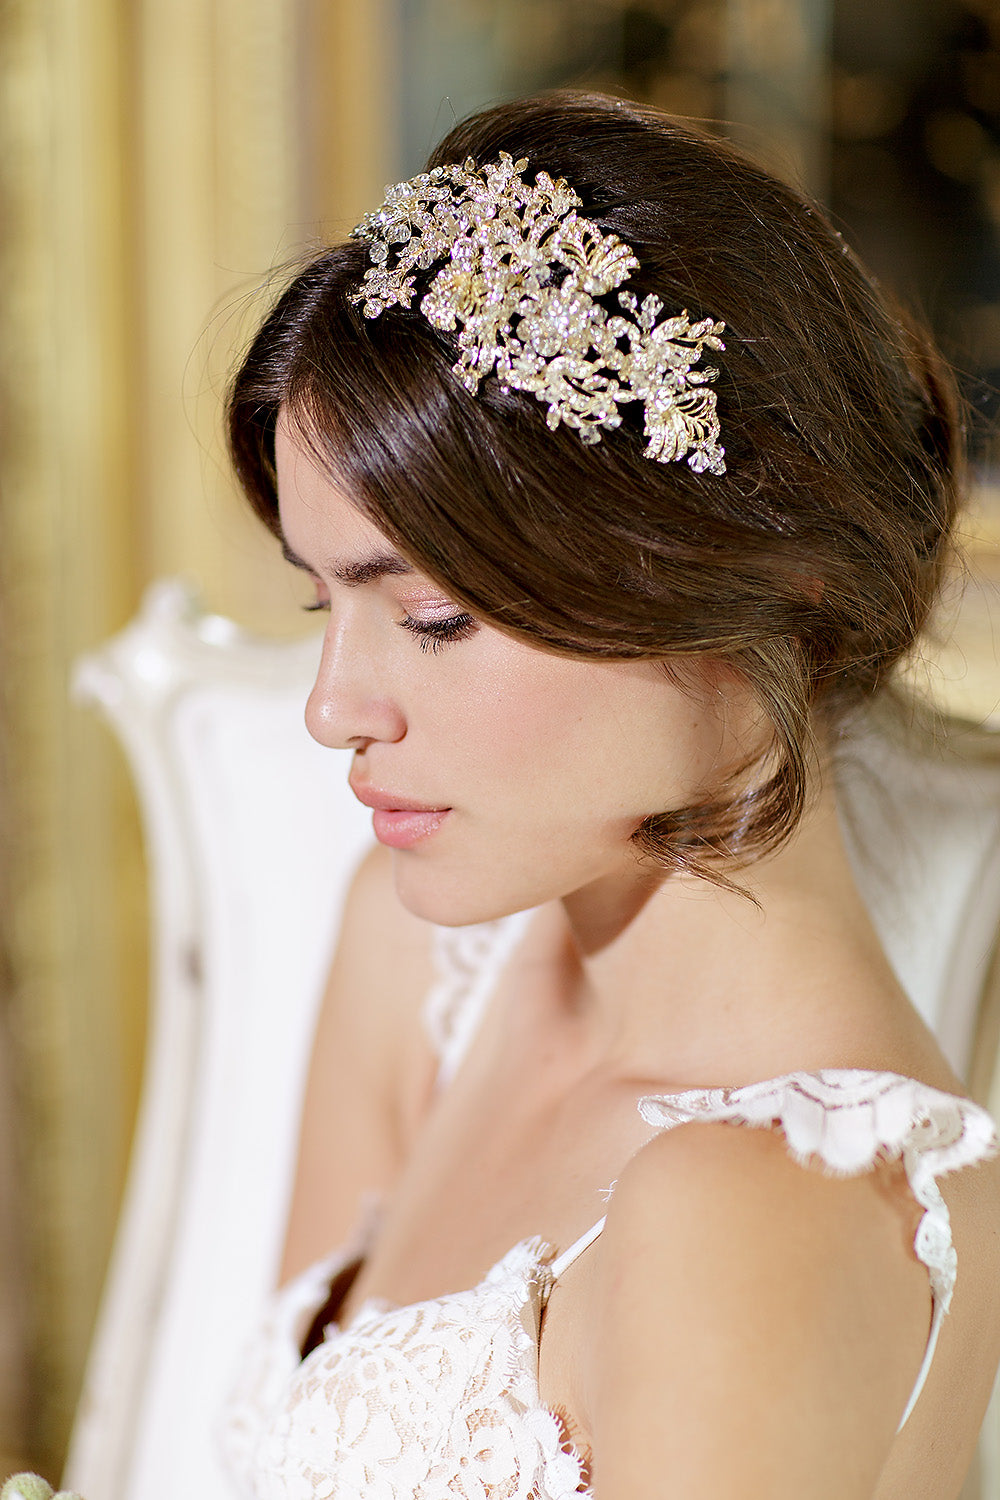 How to Choose the Perfect Bridal Hair Accessories